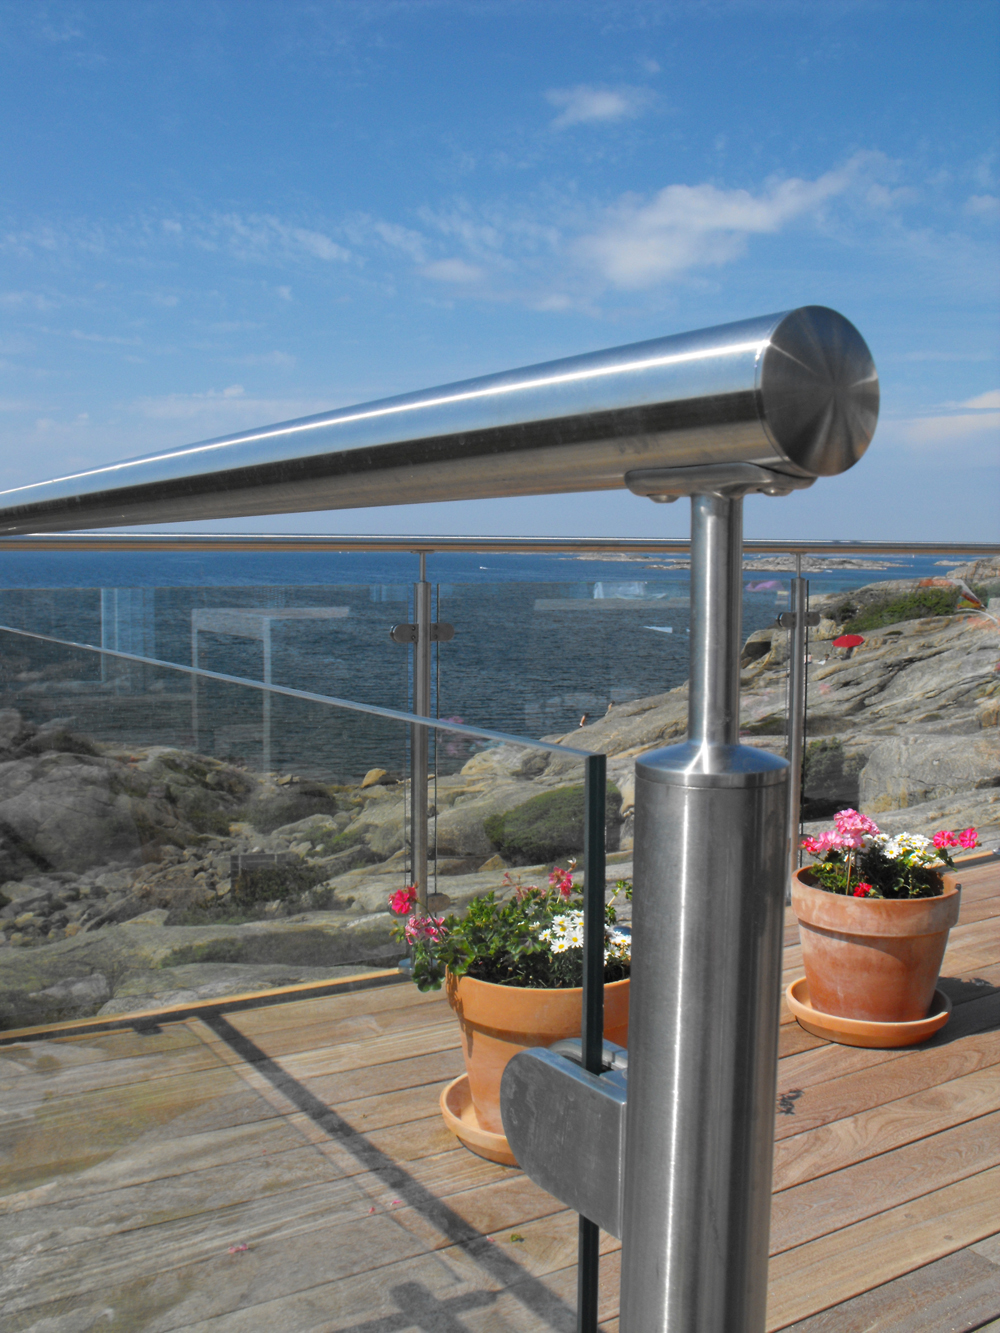 Stainless Steel End Post Kit Balustrade Round Post 316 Grade Daimeter 50.8mm for Use with Glass Infill Panels